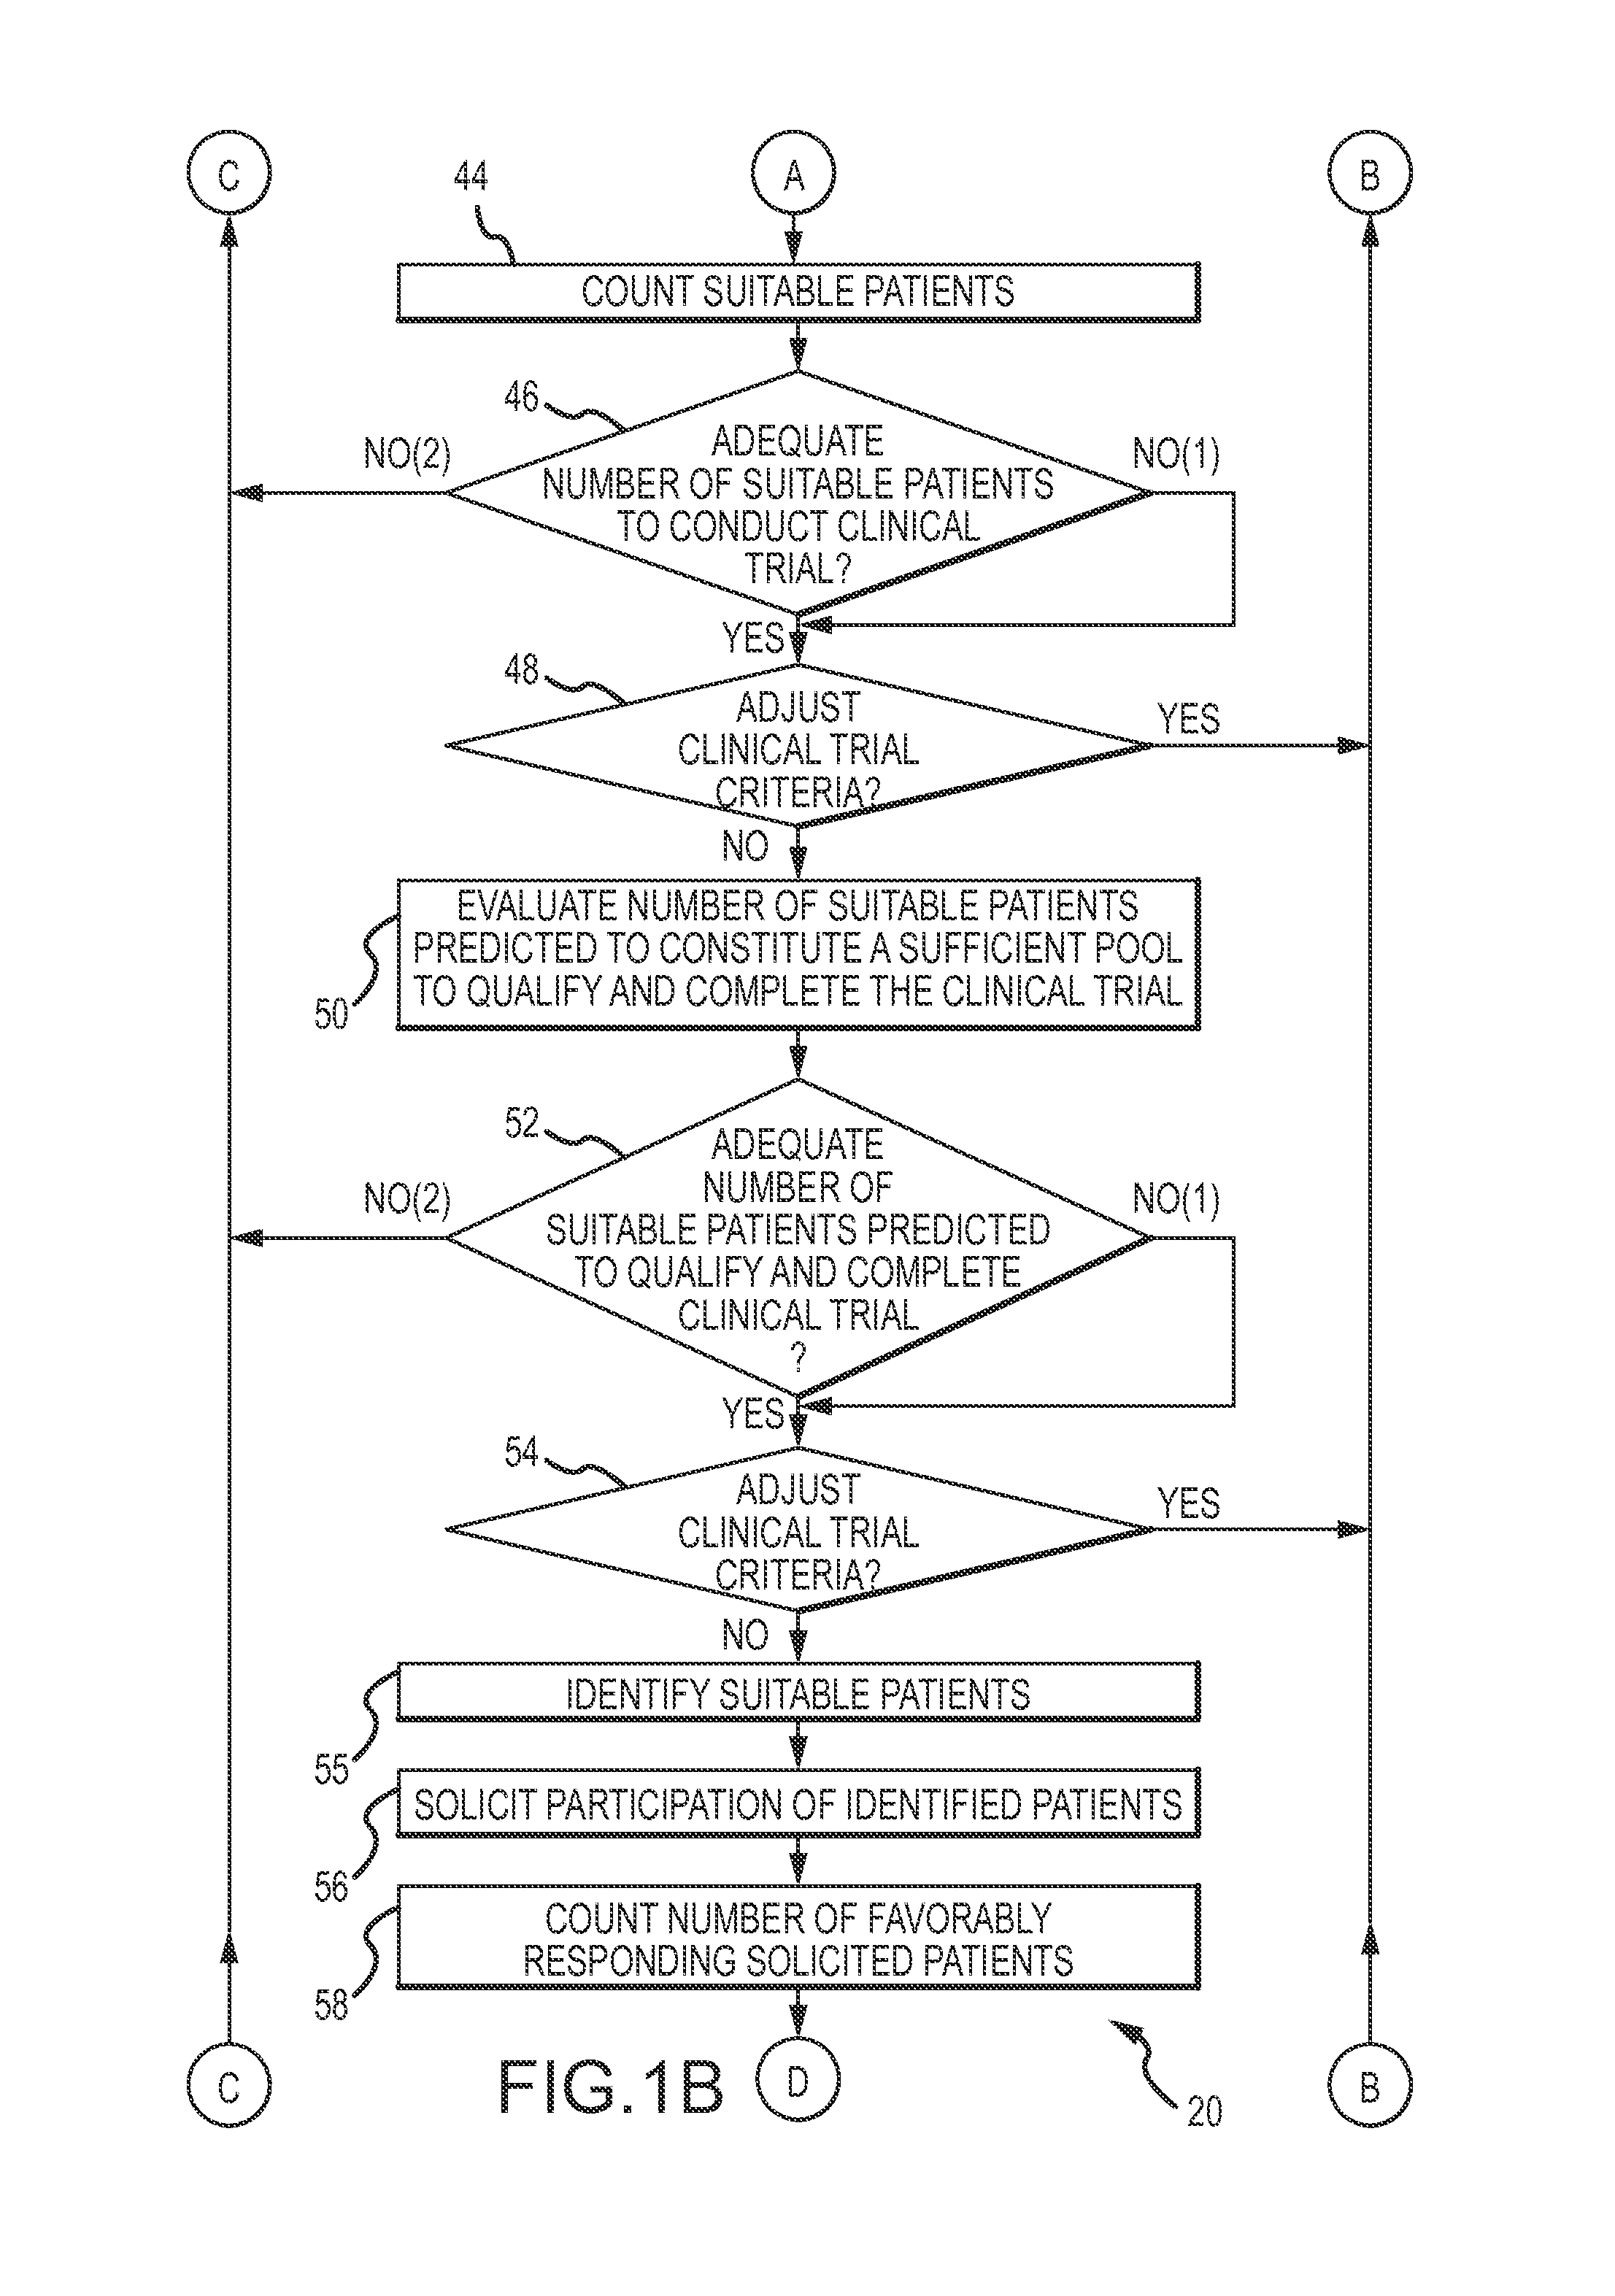 Aggregated Electronic Health Record Based, Massively Scalable and Dynamically Adjustable Clinical Trial Design and Enrollment Procedure